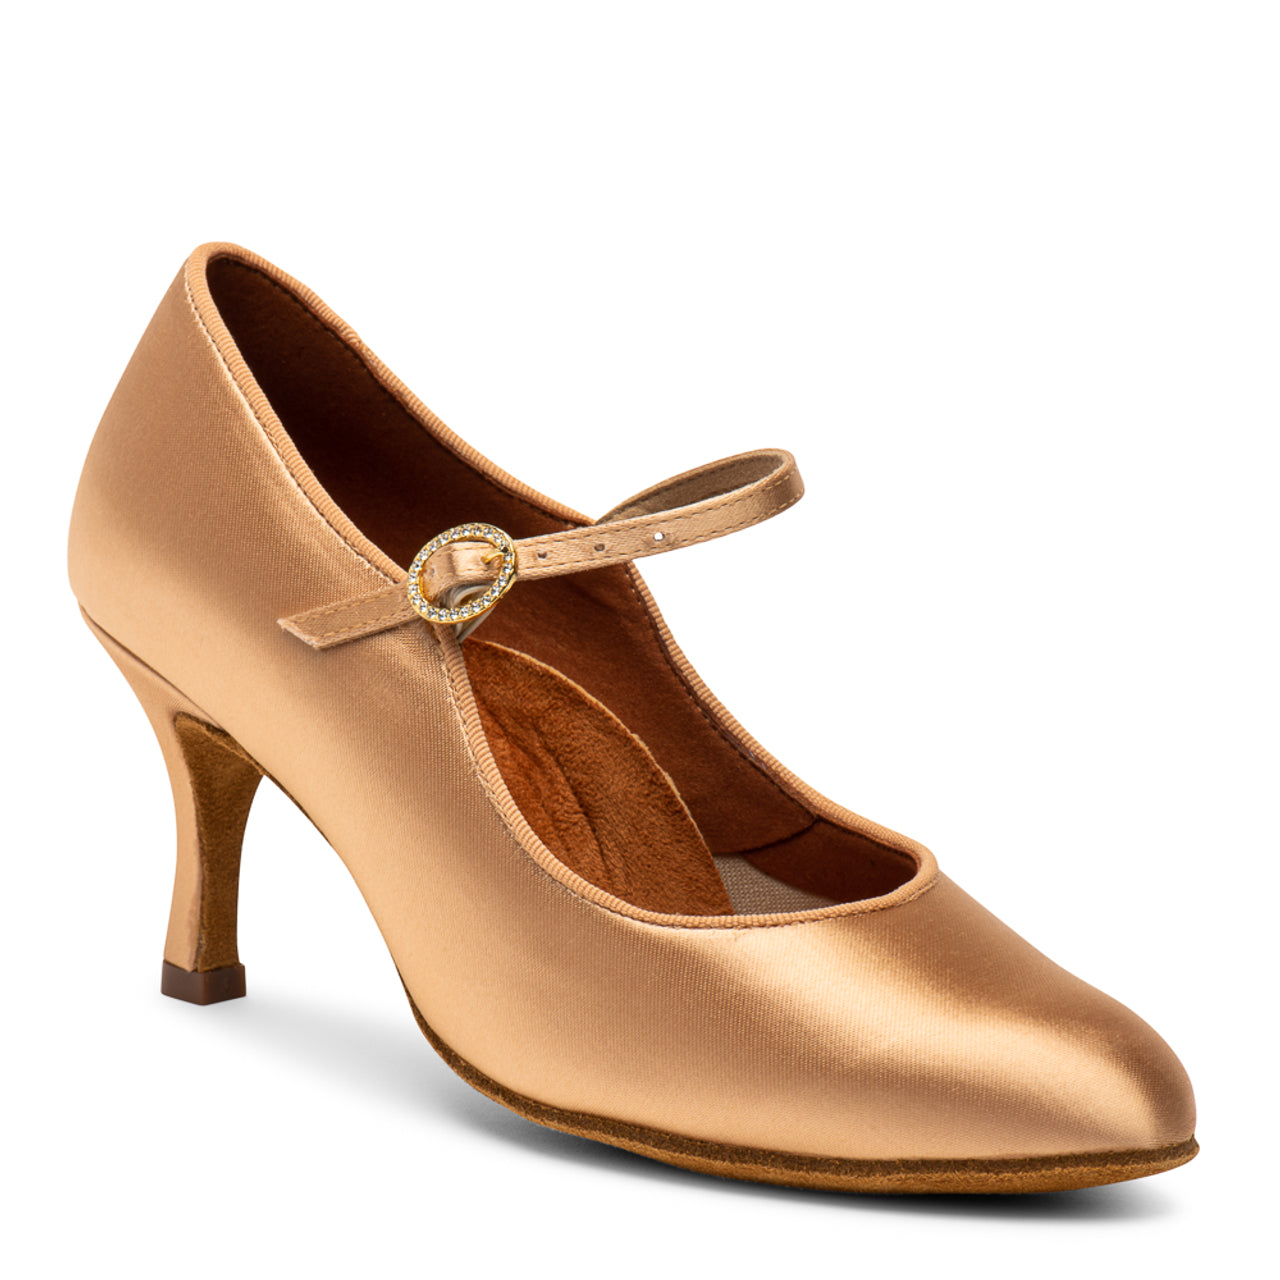 Standard Style International Dance Shoes IDS Ladies Satin Ballroom Shoes Available in multiple Colors and Heel Options ICS CLASSIC